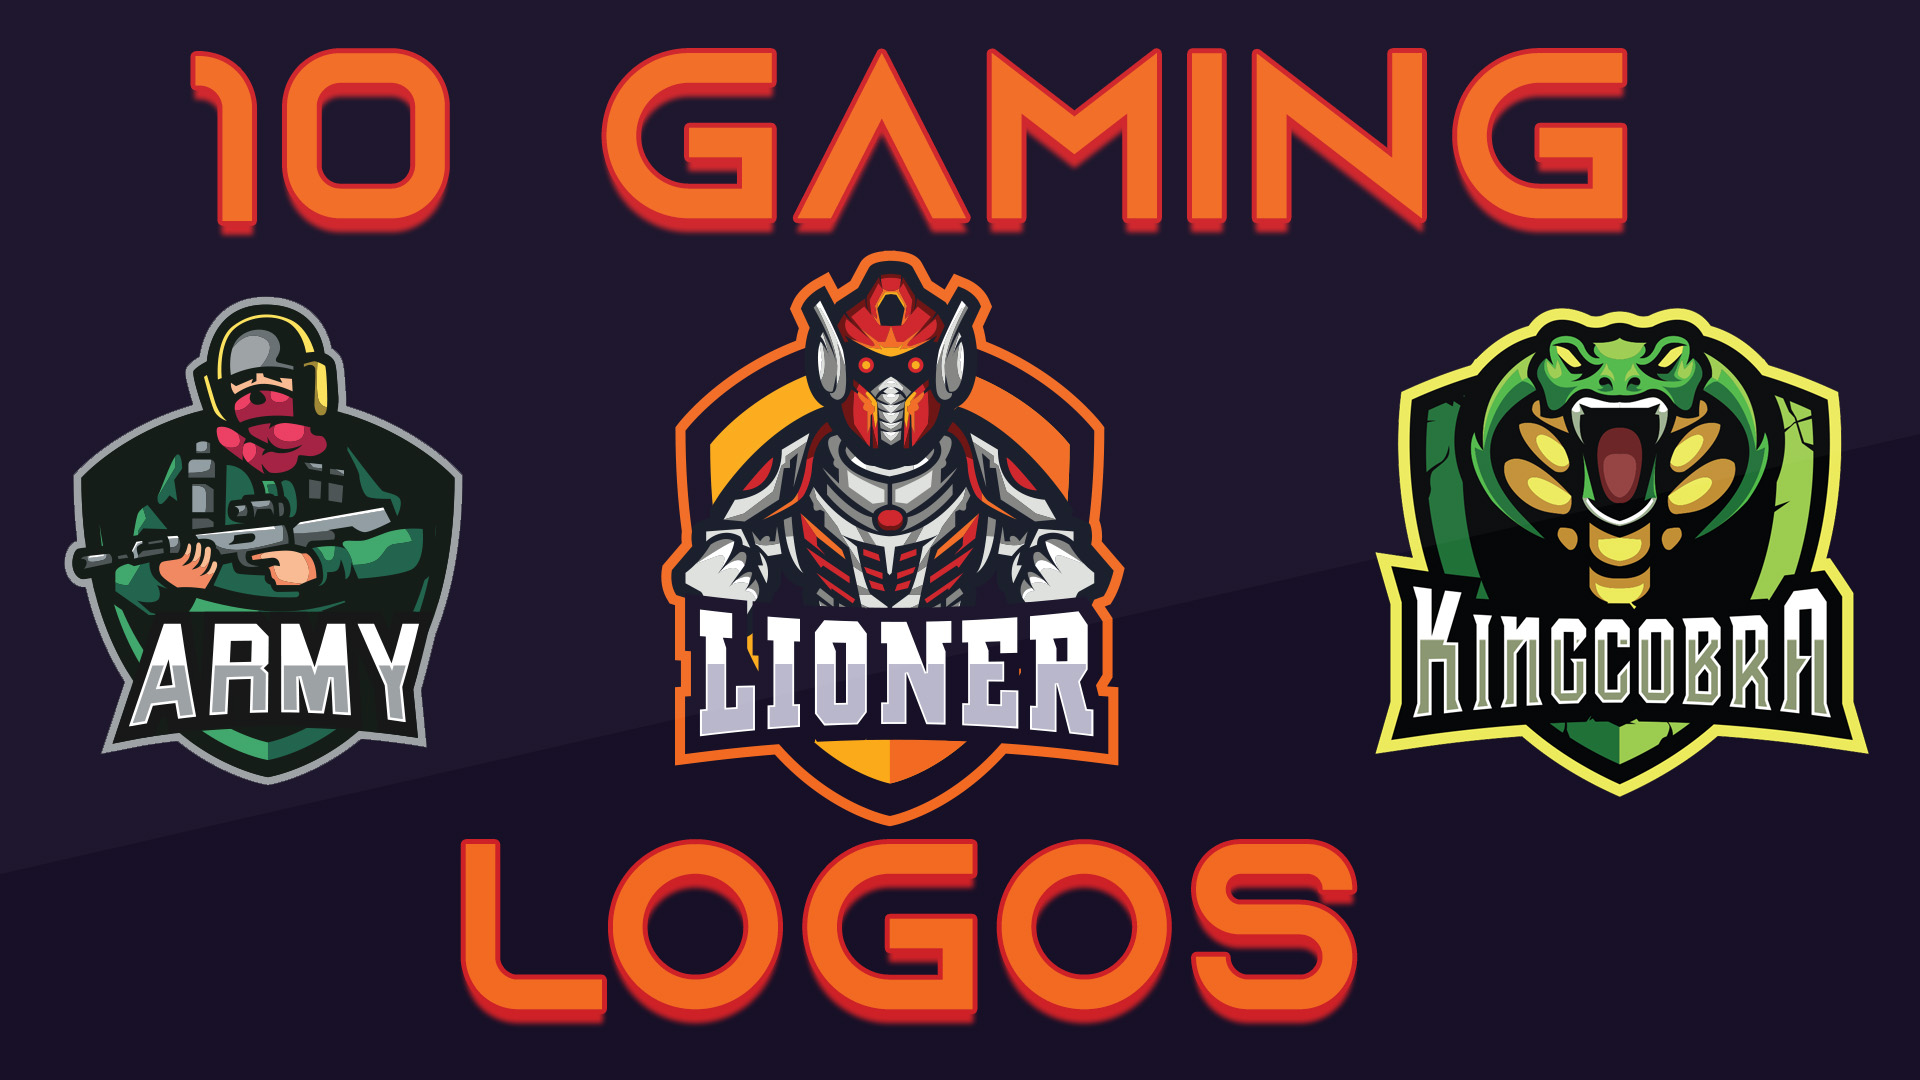 10 Awesome Gaming Logo Templates for Free – EnzeeFX